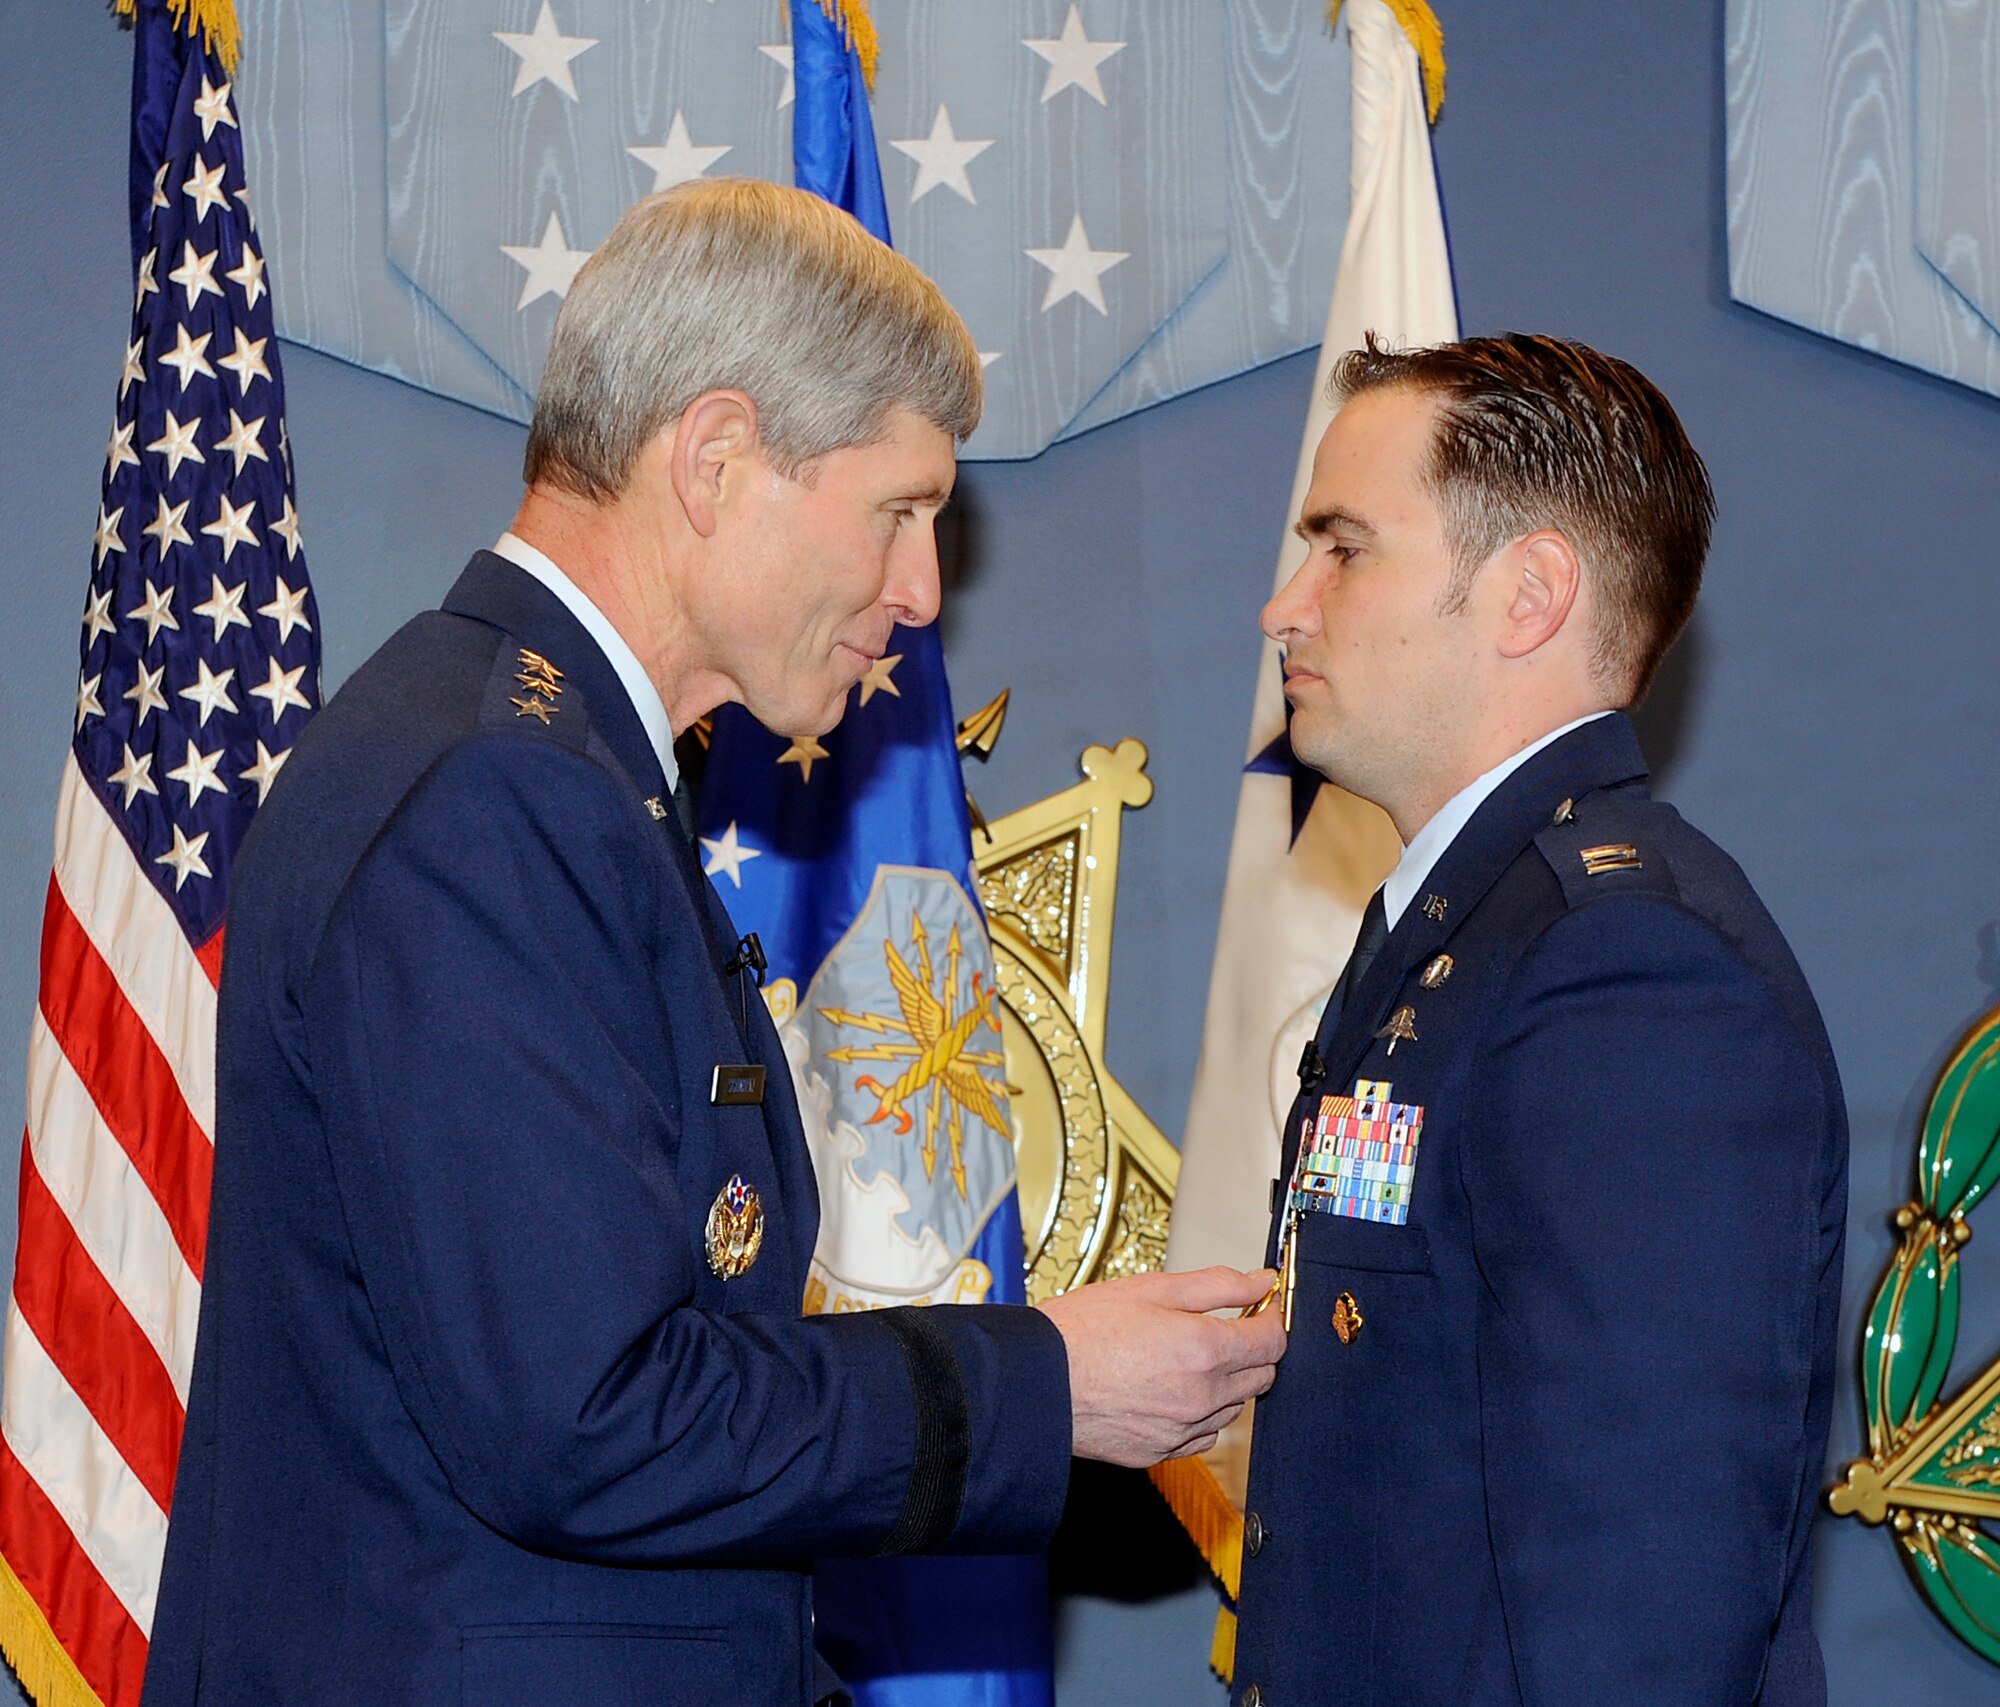 Air Force Chief of Staff Gen. Norton Schwartz pins the Air Force Cross on Capt. Barry Crawford during a ceremony in the Pentagon's Hall of Heroes in Washington, D.C., on April 12, 2012.  (U.S. Air Force photo/Andy Morataya)